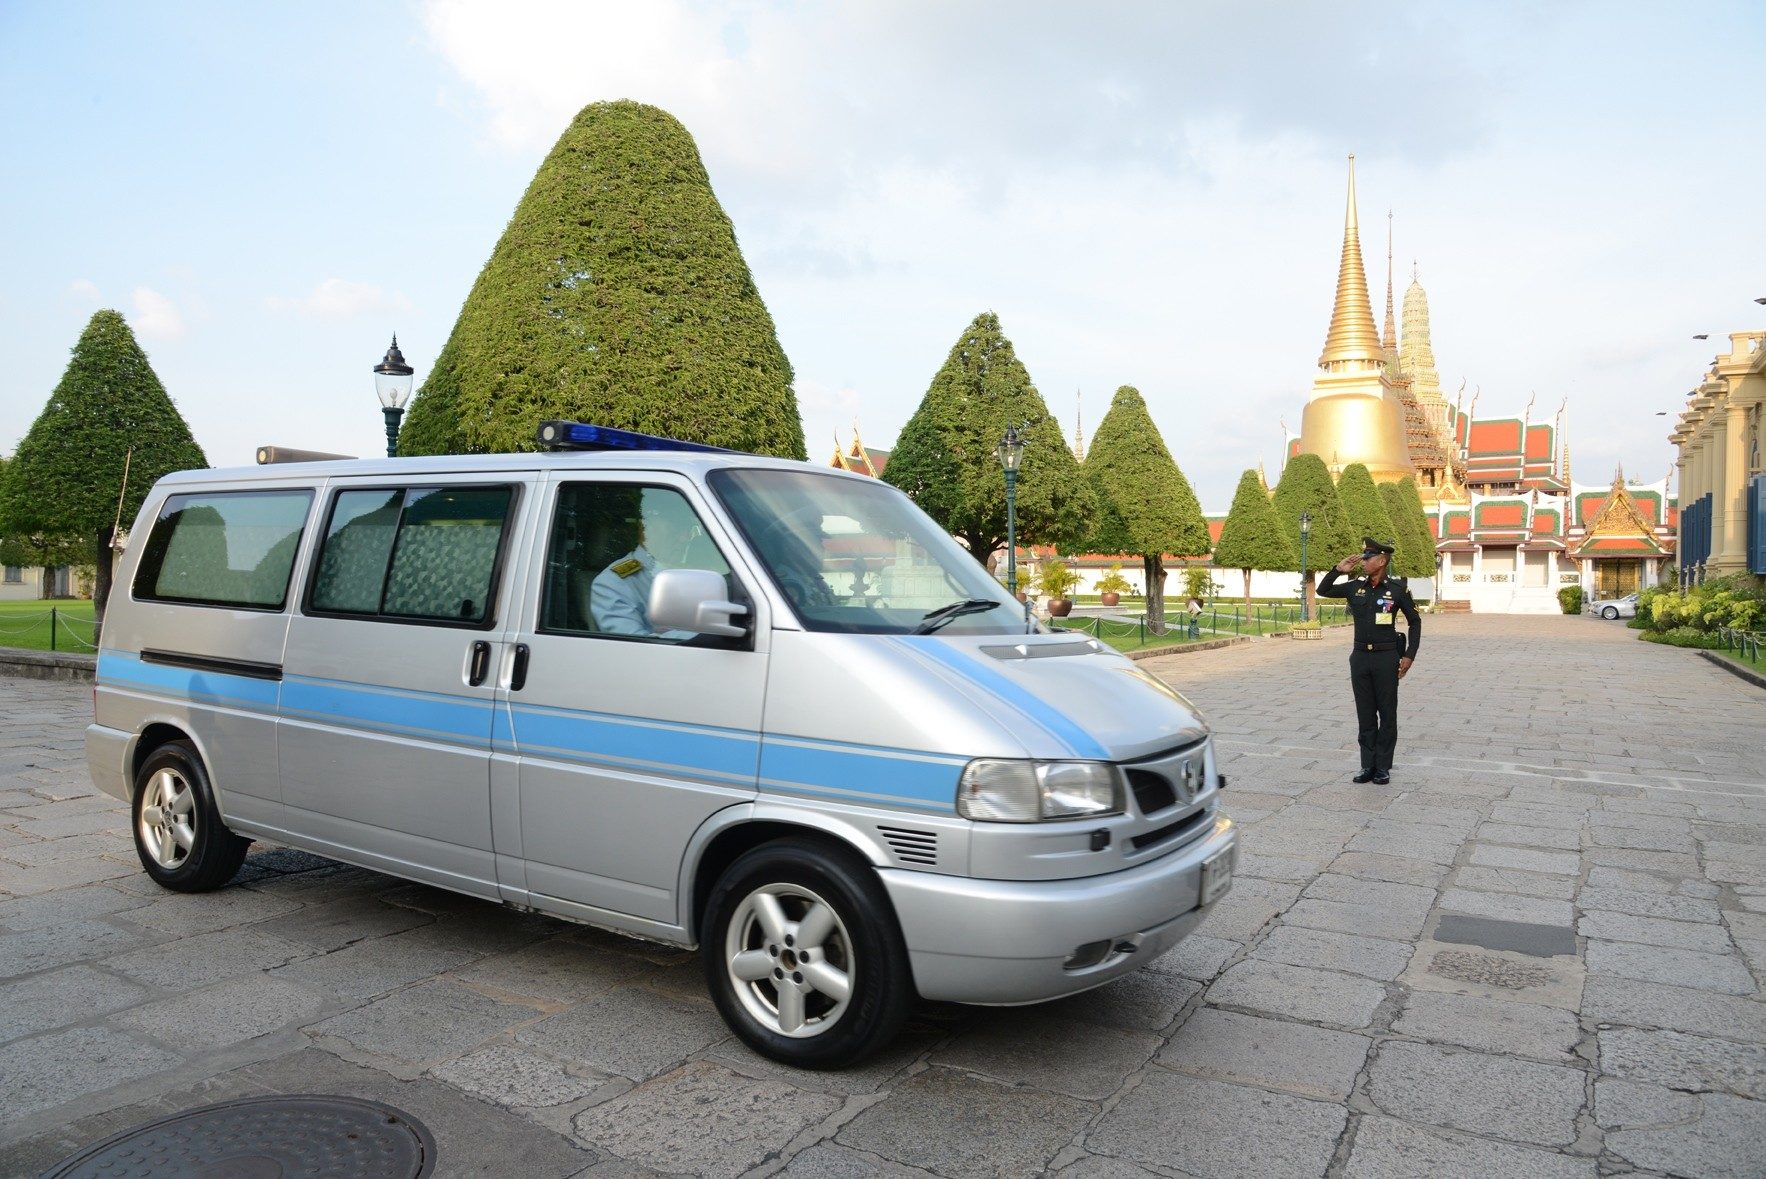 This picture received by the Thai Royal Bureau and taken on October 14, 2016 shows the hearse carrying the body of the late Thai King Bhumibol Adulyadej entering the grounds of the Grand Palace after being taken from Siriraj Hospital in Bangkok after his death on October 13, 2016. Bhumibol, the world's longest-reigning monarch, passed away at 88, after years of ill health, ending seven decades as a stabilising figure in a nation of deep political divisions. / AFP PHOTO / Thai Royal Bureau / STR / RESTRICTED TO EDITORIAL USE - MANDATORY CREDIT "AFP PHOTO / HO / ROYAL BUREAU - NO MARKETING NO ADVERTISING CAMPAIGNS - DISTRIBUTED AS A SERVICE TO CLIENTS